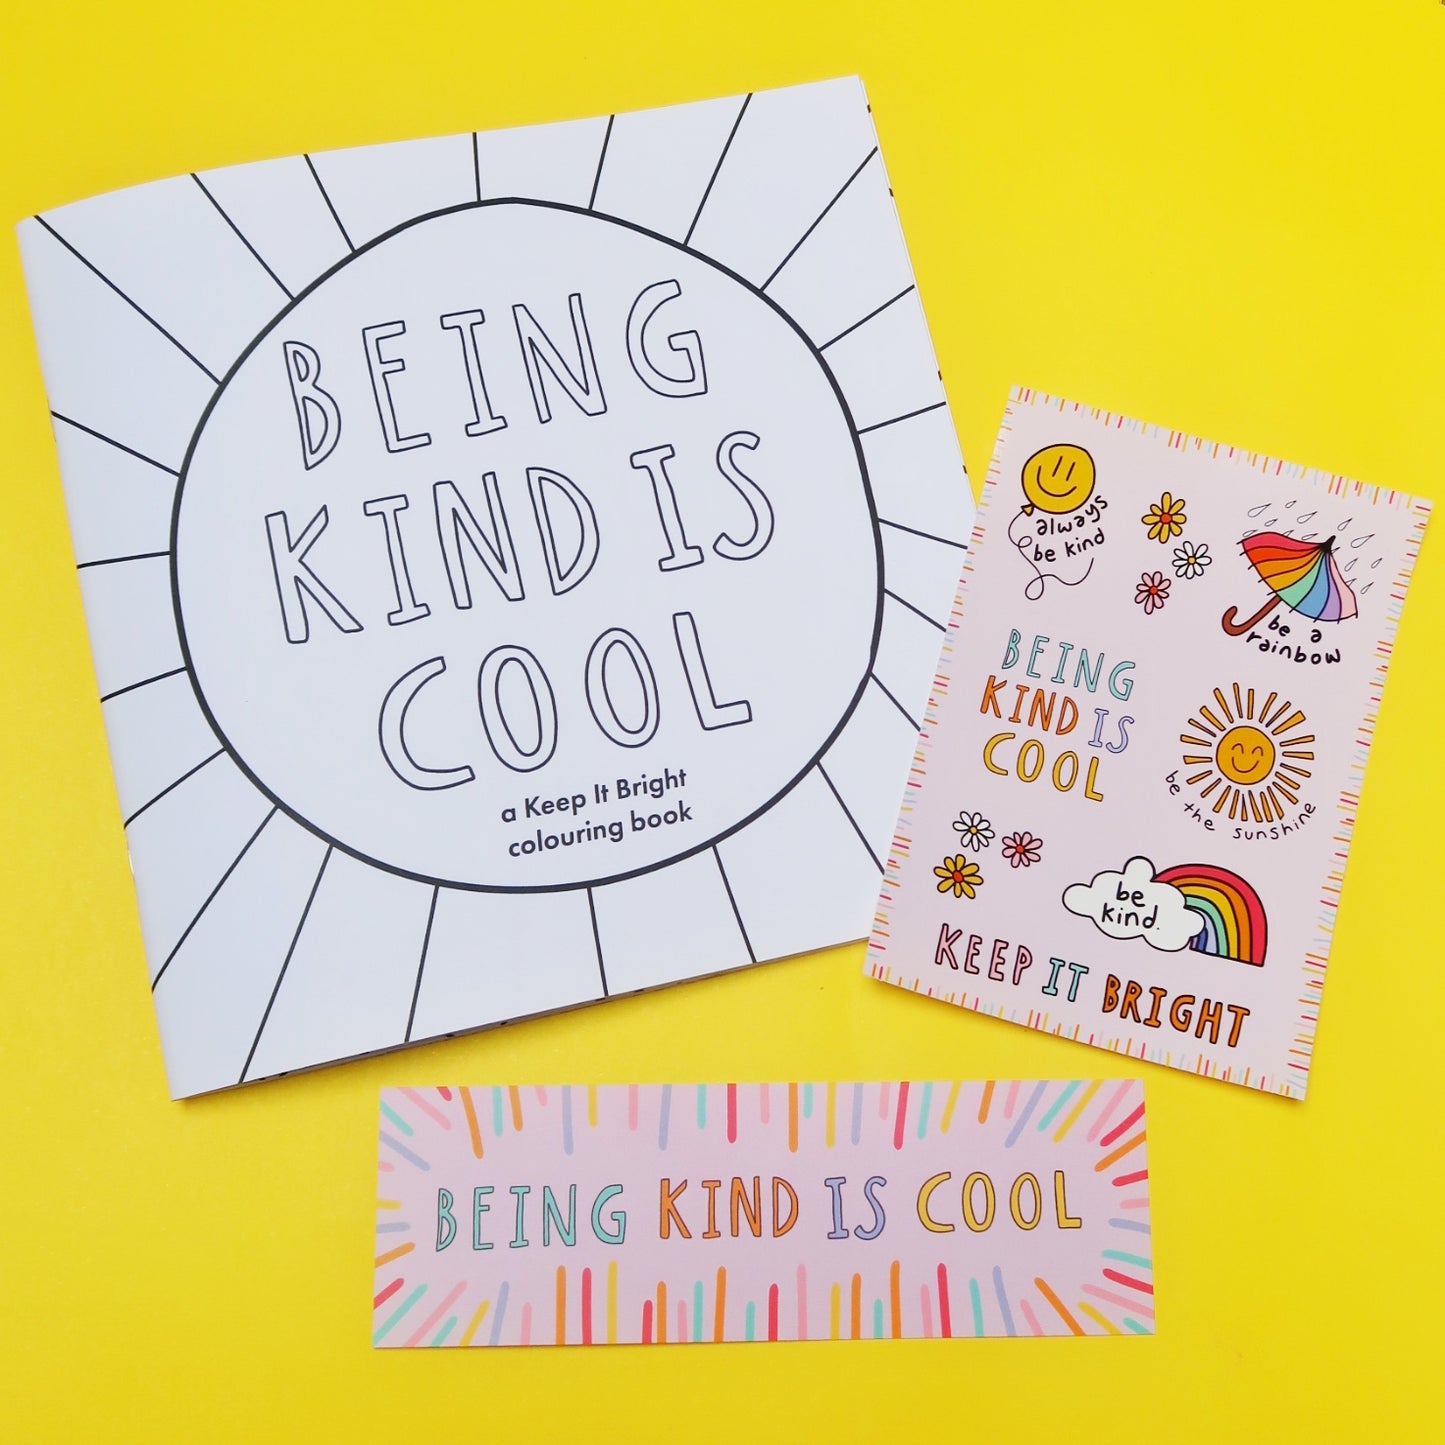 Being Kind Is Cool kids colouring book - a book about kindness - bundle